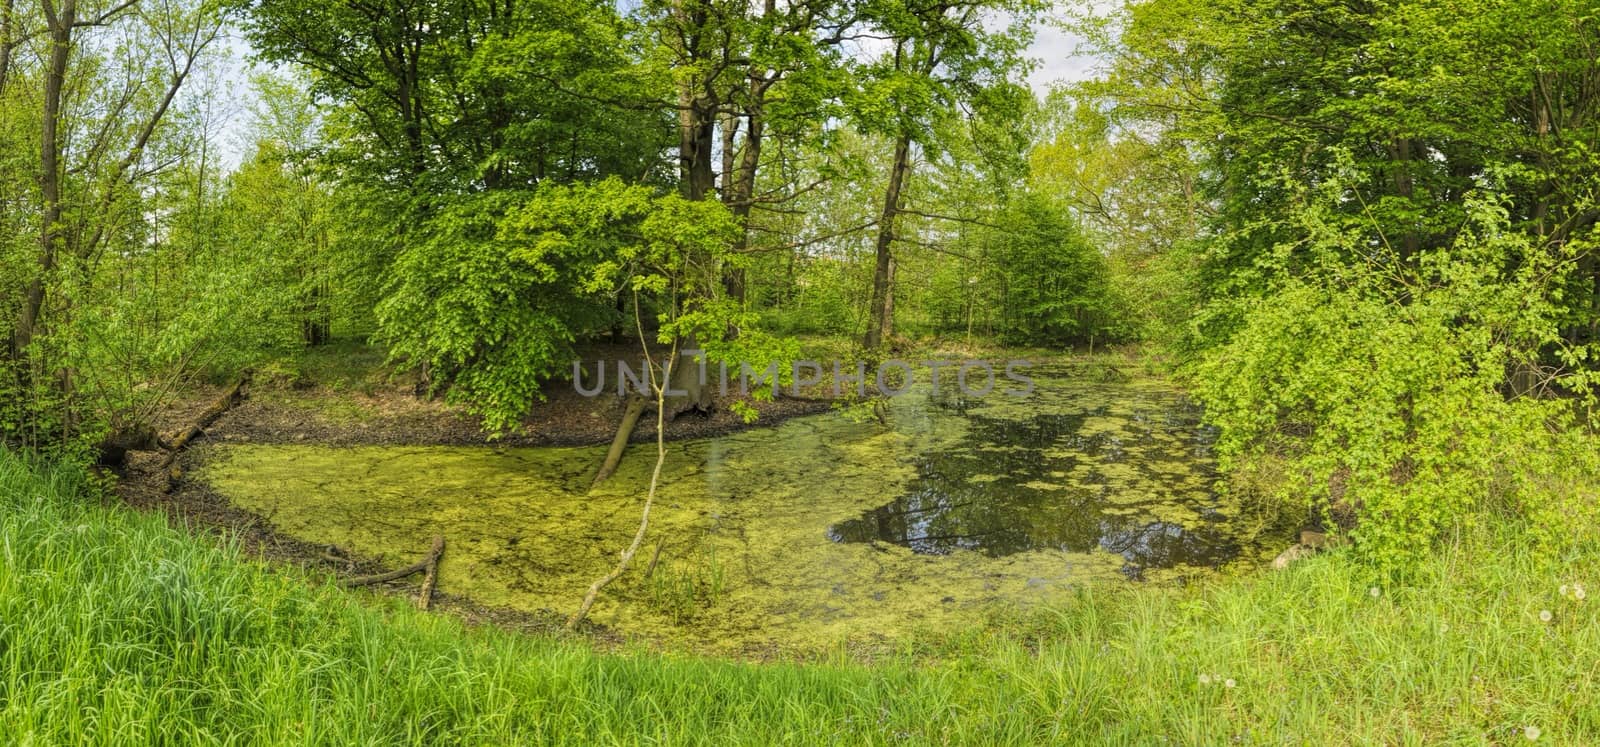 Green pond on sunny day surrounded by green vegetation